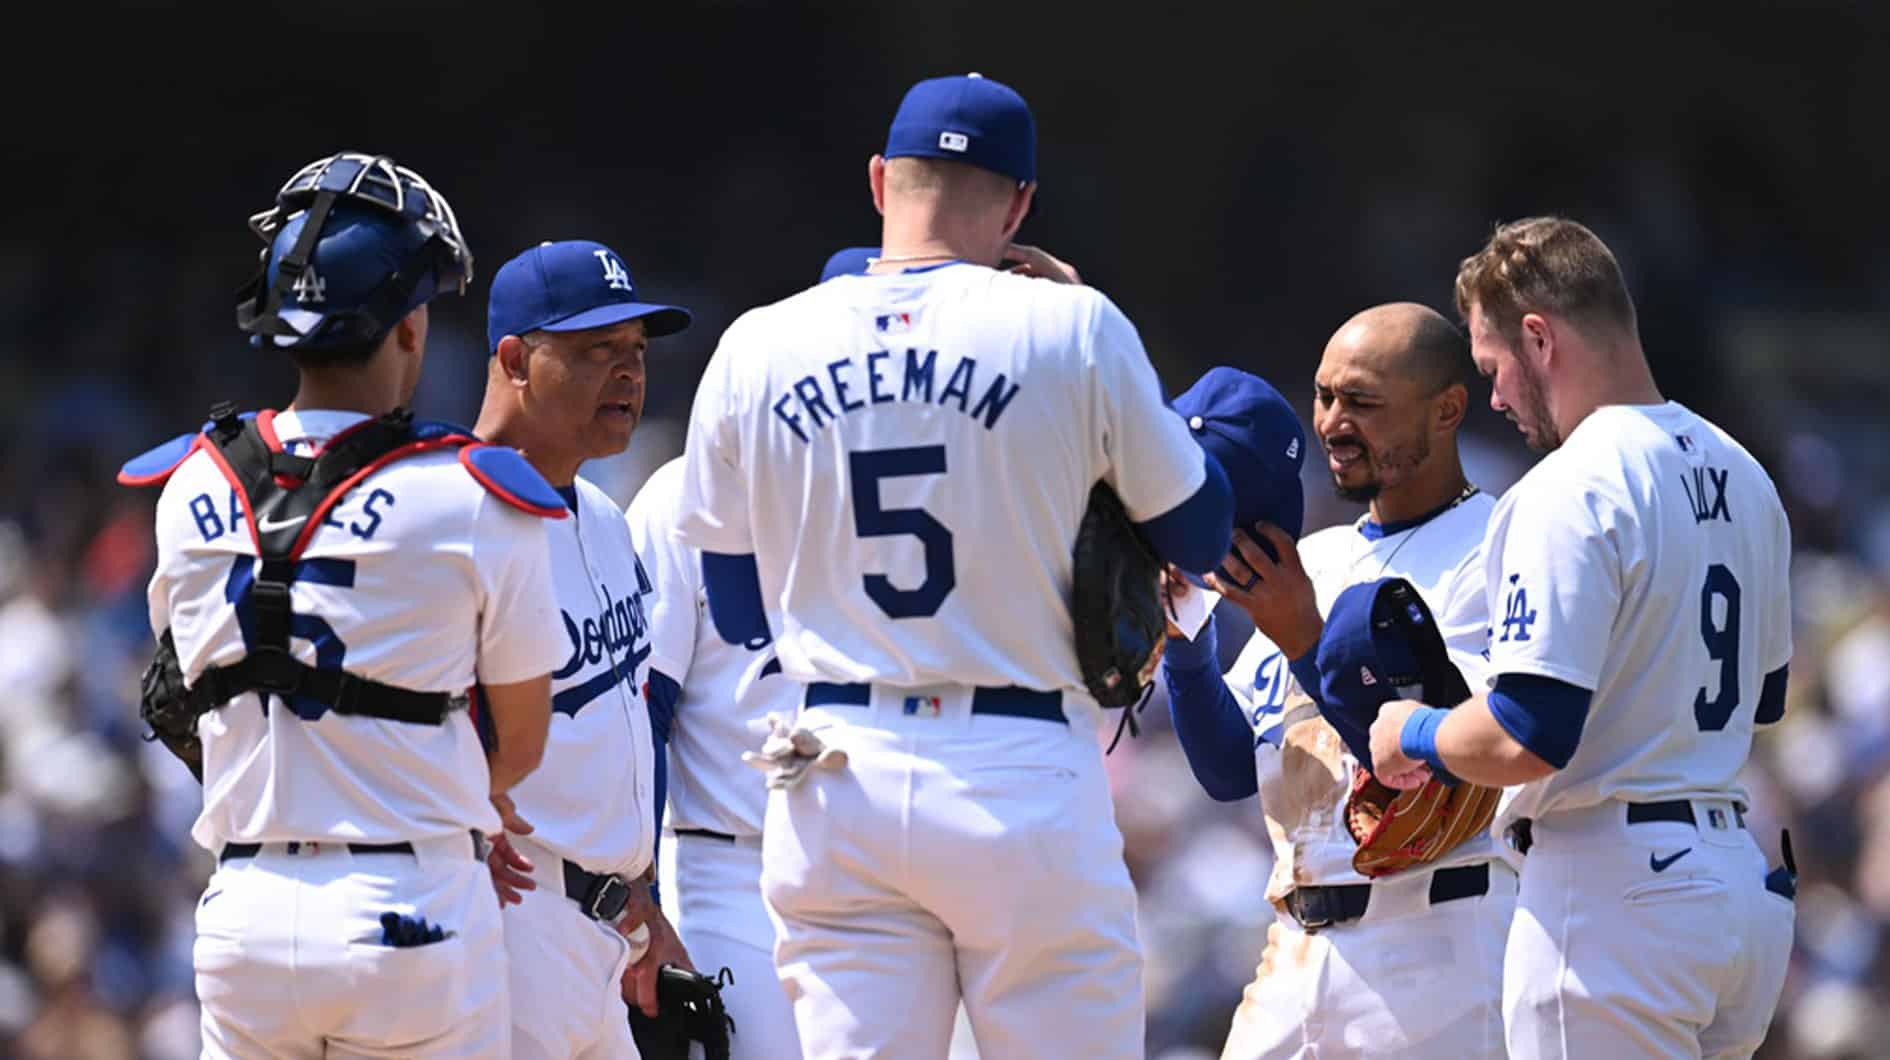 Los Angeles Dodgers manager Dave Roberts (30) meets at the mound with first baseman Freddie Freeman (5), shortstop Mookie Betts (50), catcher Austin Barnes (15), and second baseman Gavin Lux (9) against the New York Mets during the fourth inning at Dodger Stadium.